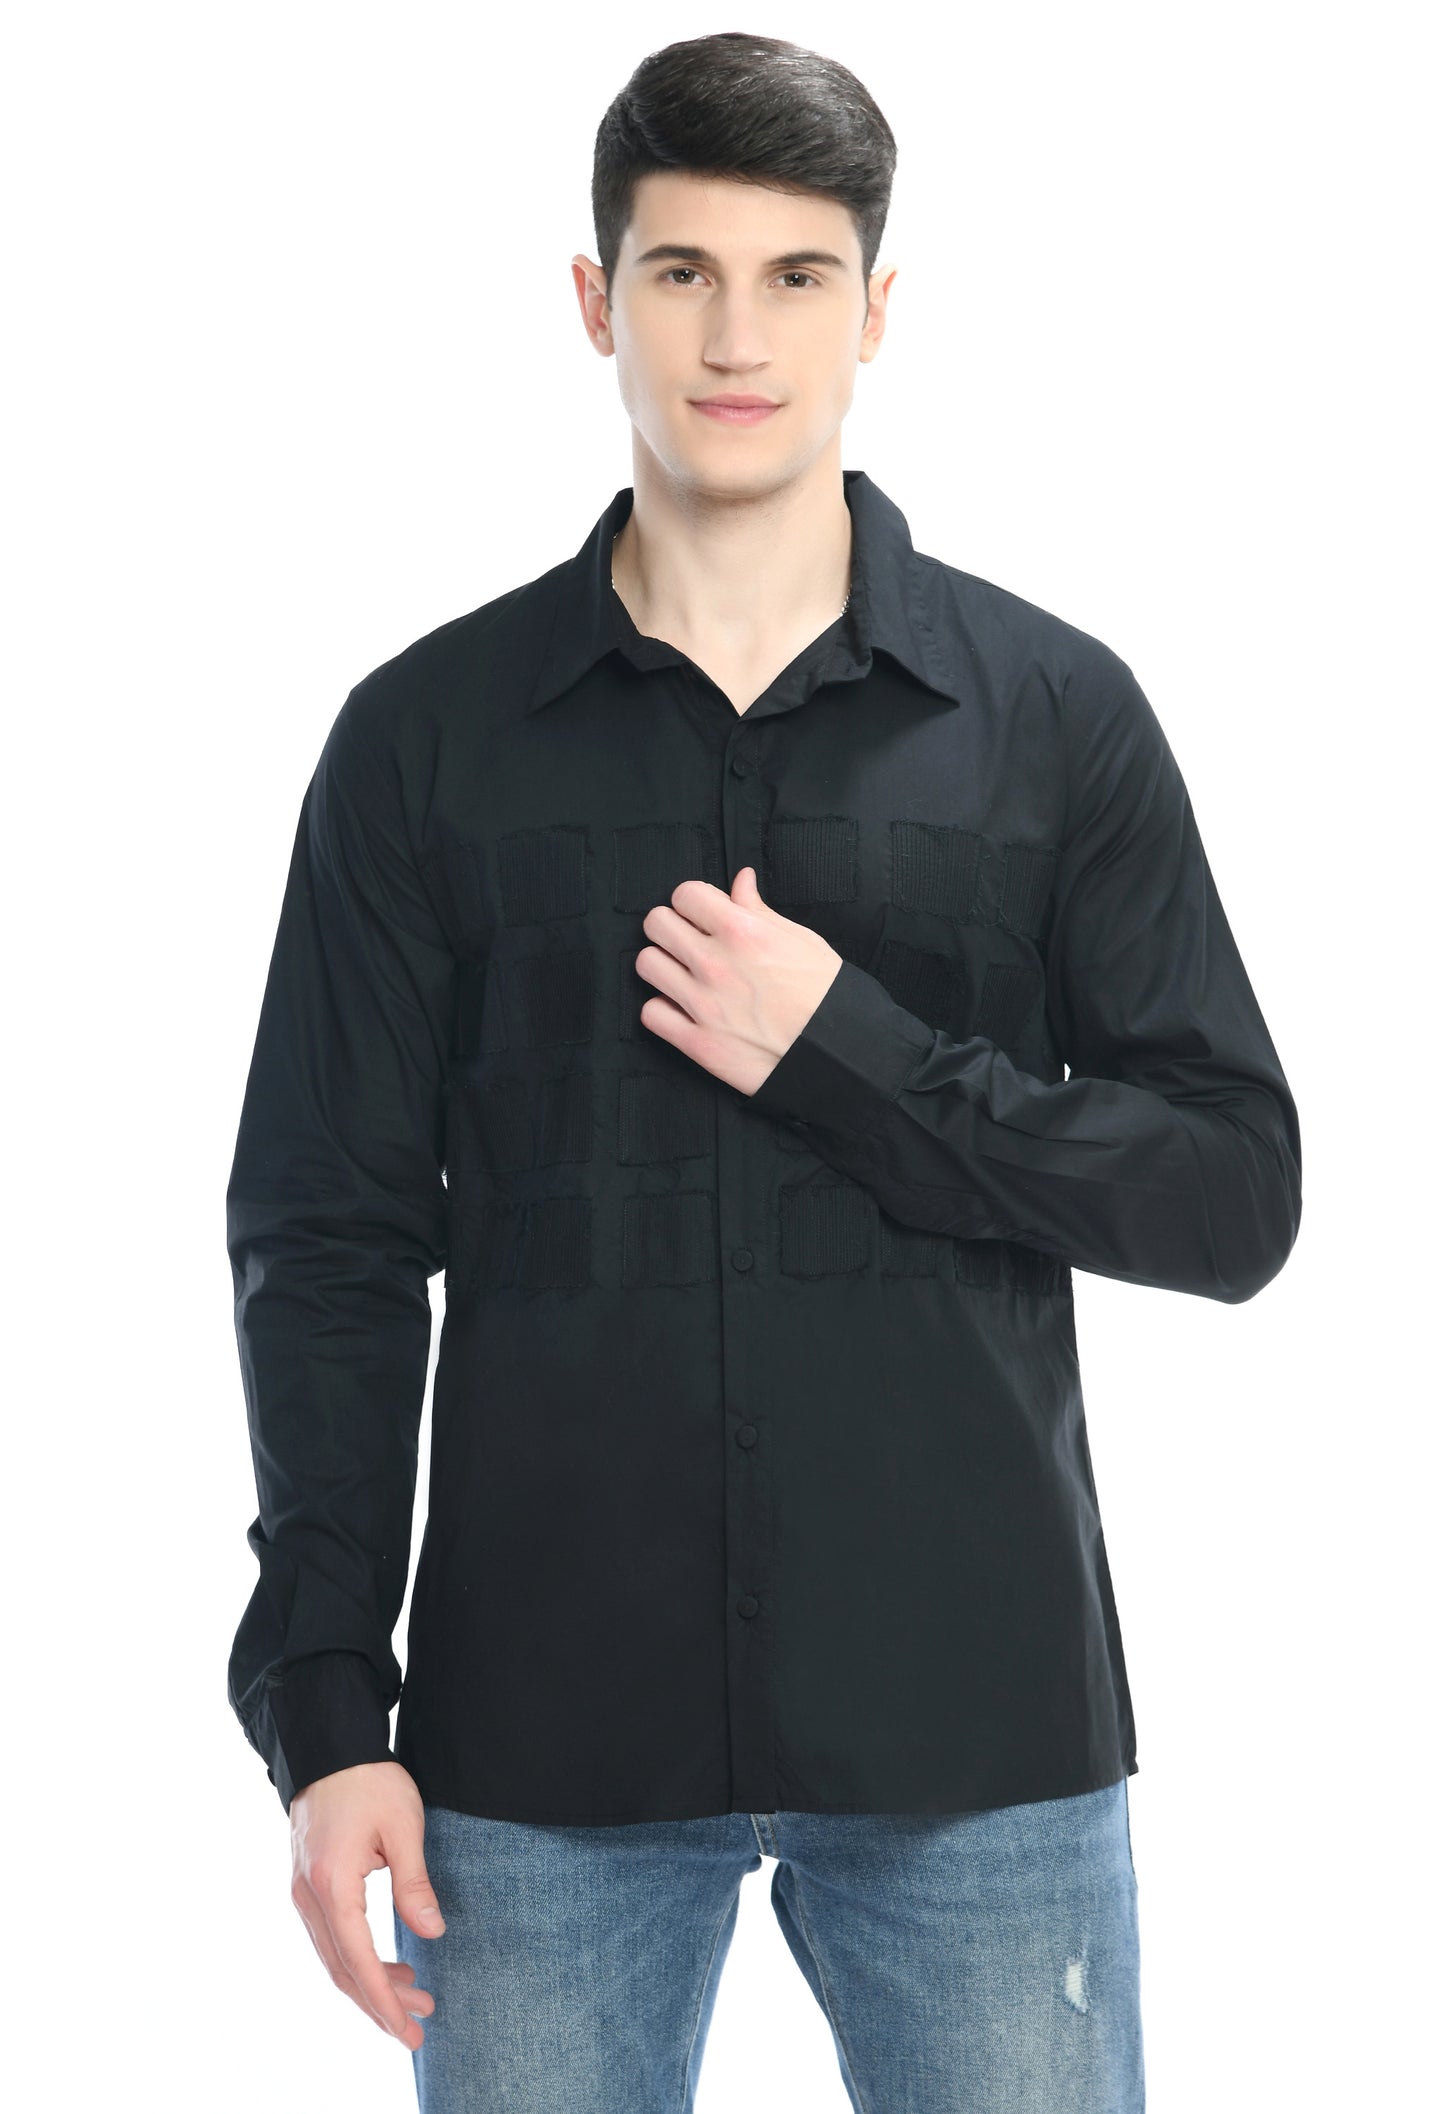 A black cotton shirt showcasing tone on tone appliqué work in form of small square cut design.